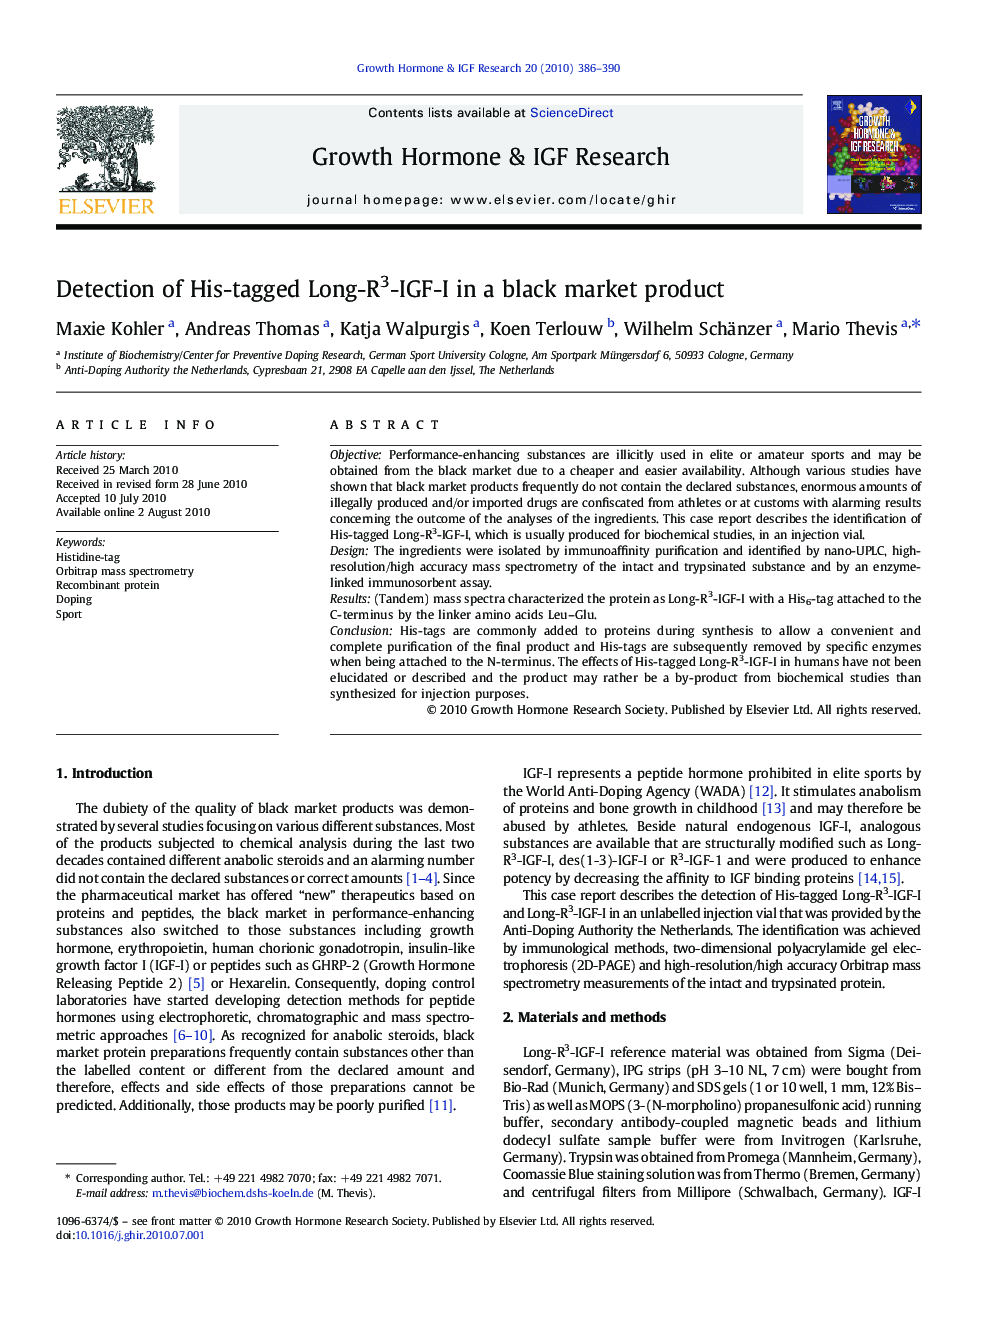 Detection of His-tagged Long-R3-IGF-I in a black market product